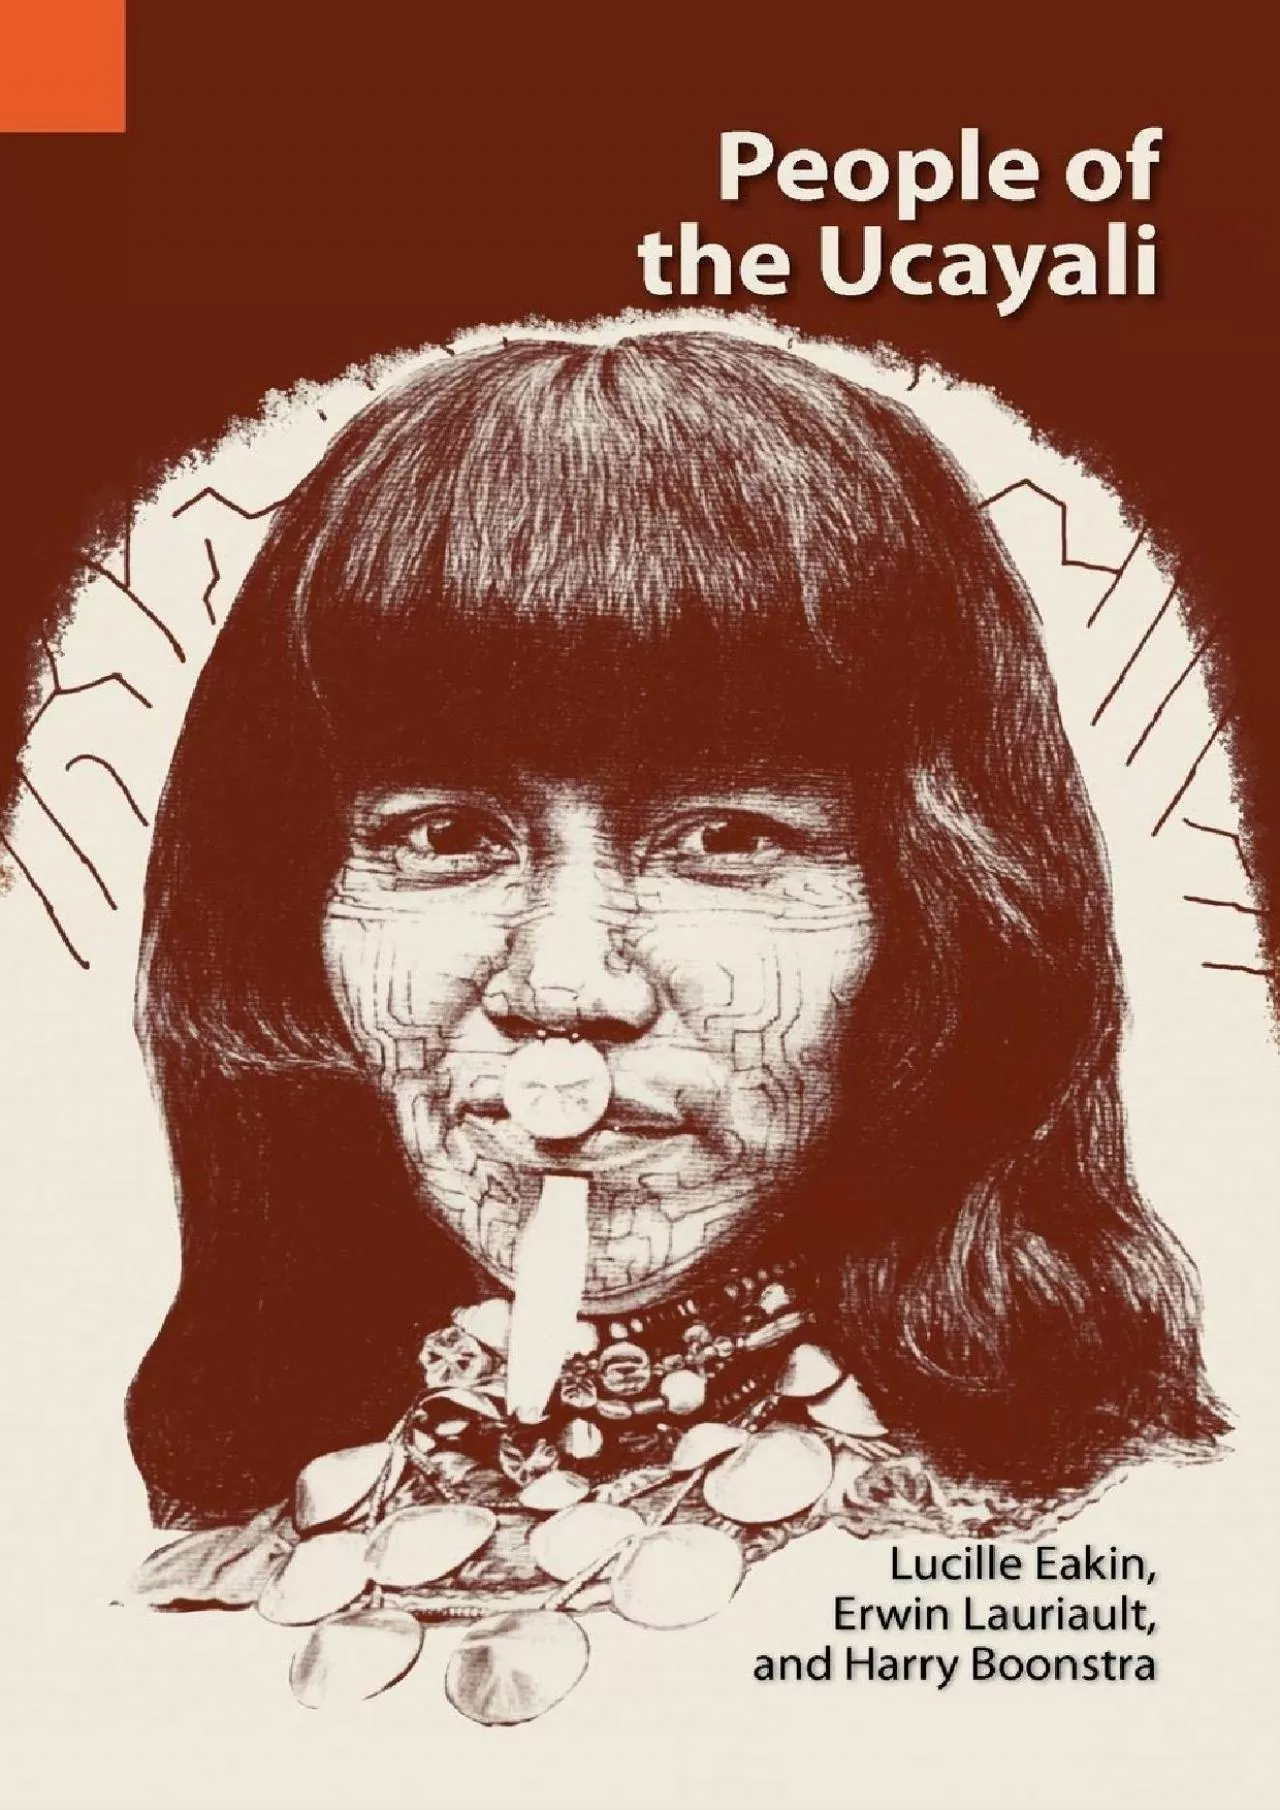 (DOWNLOAD)-People of the Ucayali: The Shipibo and Conibo of Peru (International Museum